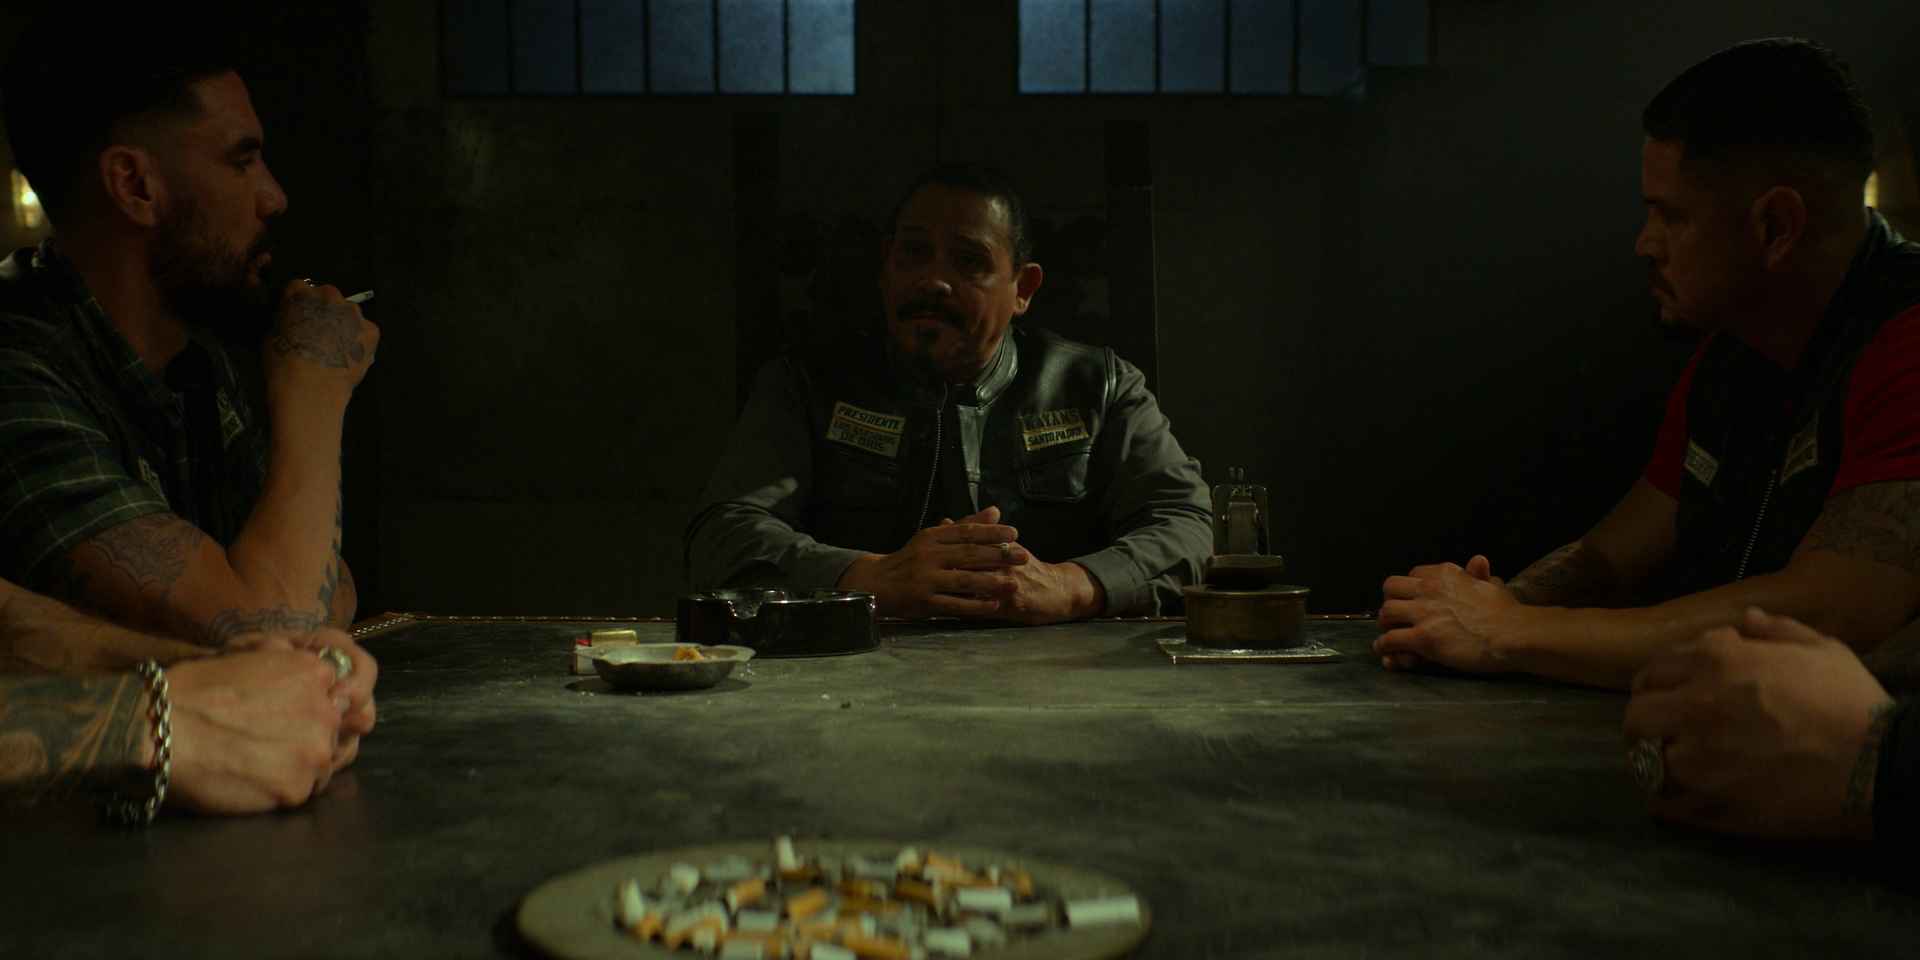 Events From Mayans M.C. Season 4 Episode 8